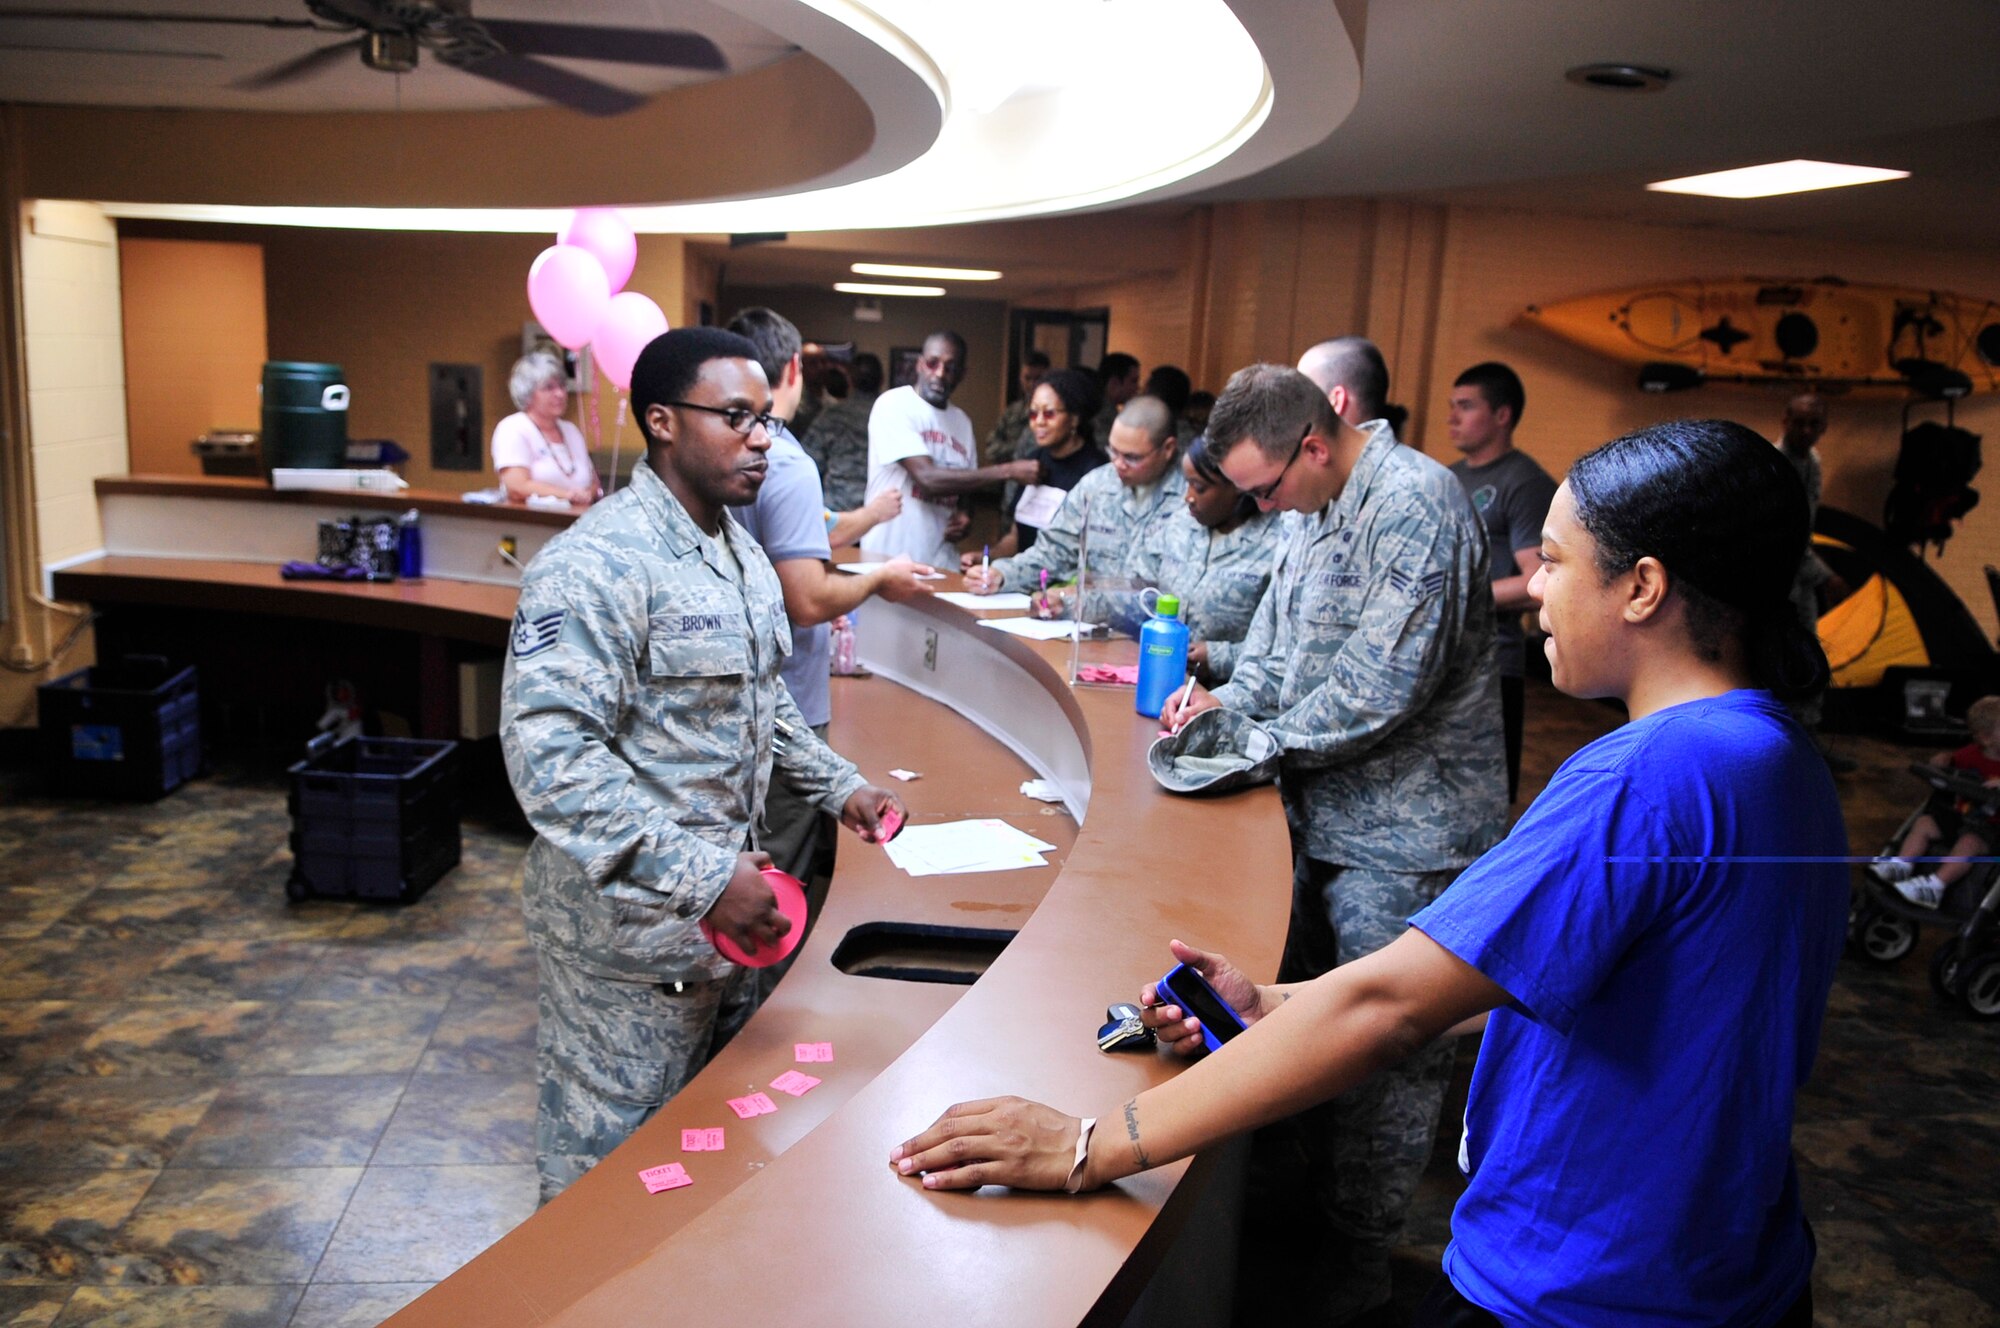 U.S. Air Force Airmen register for the annual breast cancer awareness walk at the fitness center, Shaw Air Force Base, S.C., Oct. 2, 2012.  The event was held by the Health and Wellness Center along with the 20th Medical Group.  More than 100 people participated in the walk. (U.S. Air Force photo by Airman Nicole Sikorski/Released)